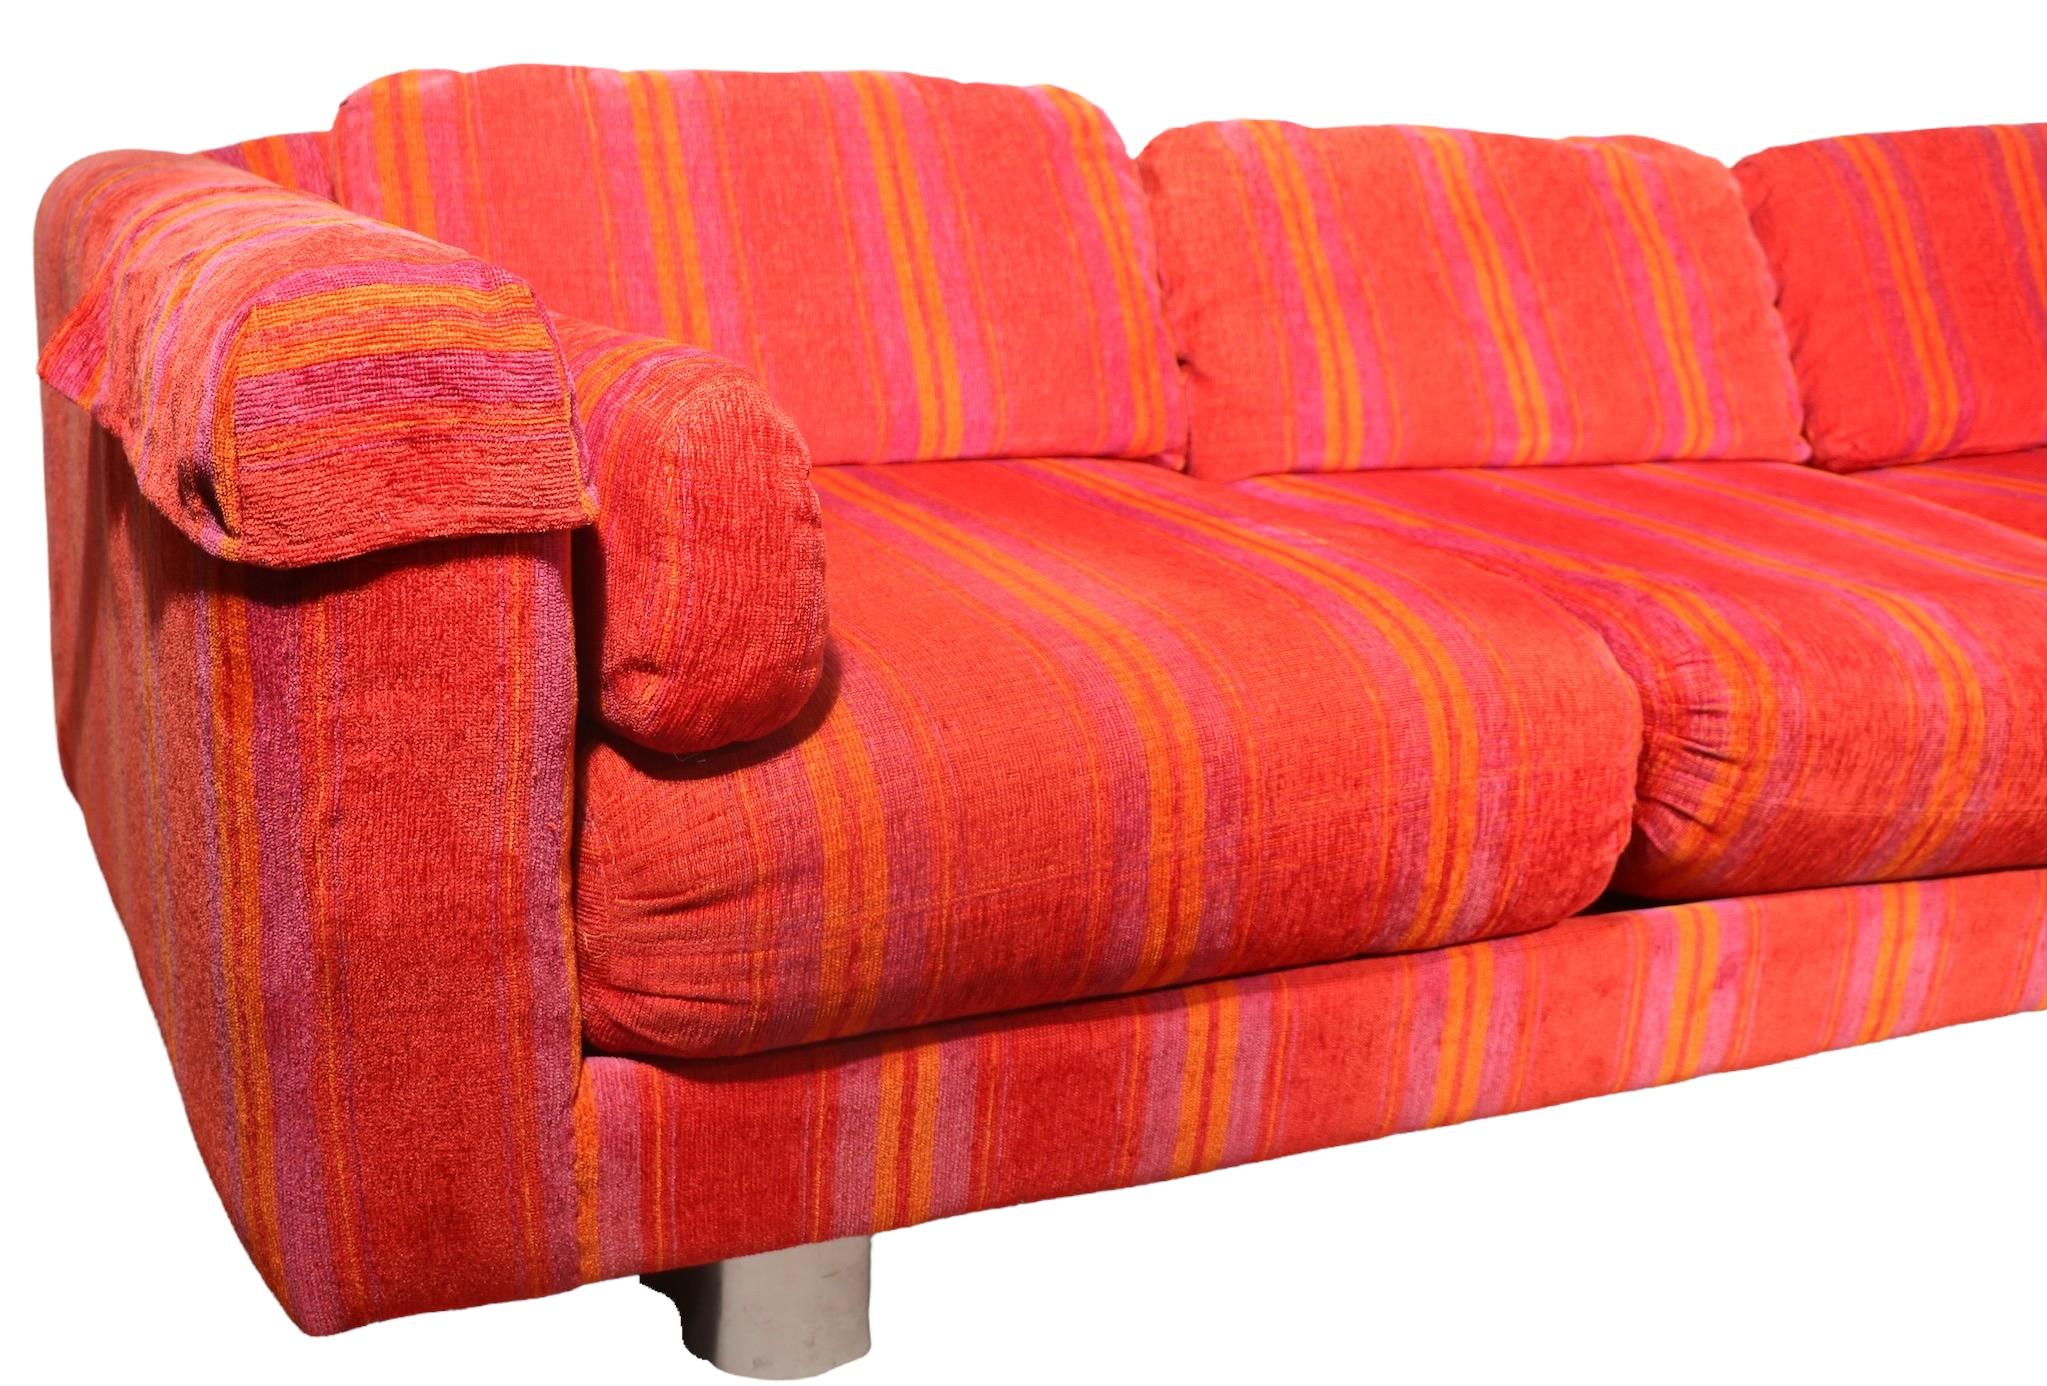 Postmodern Selig Imperial Sofa Possibly by Milo Baughman  For Sale 3